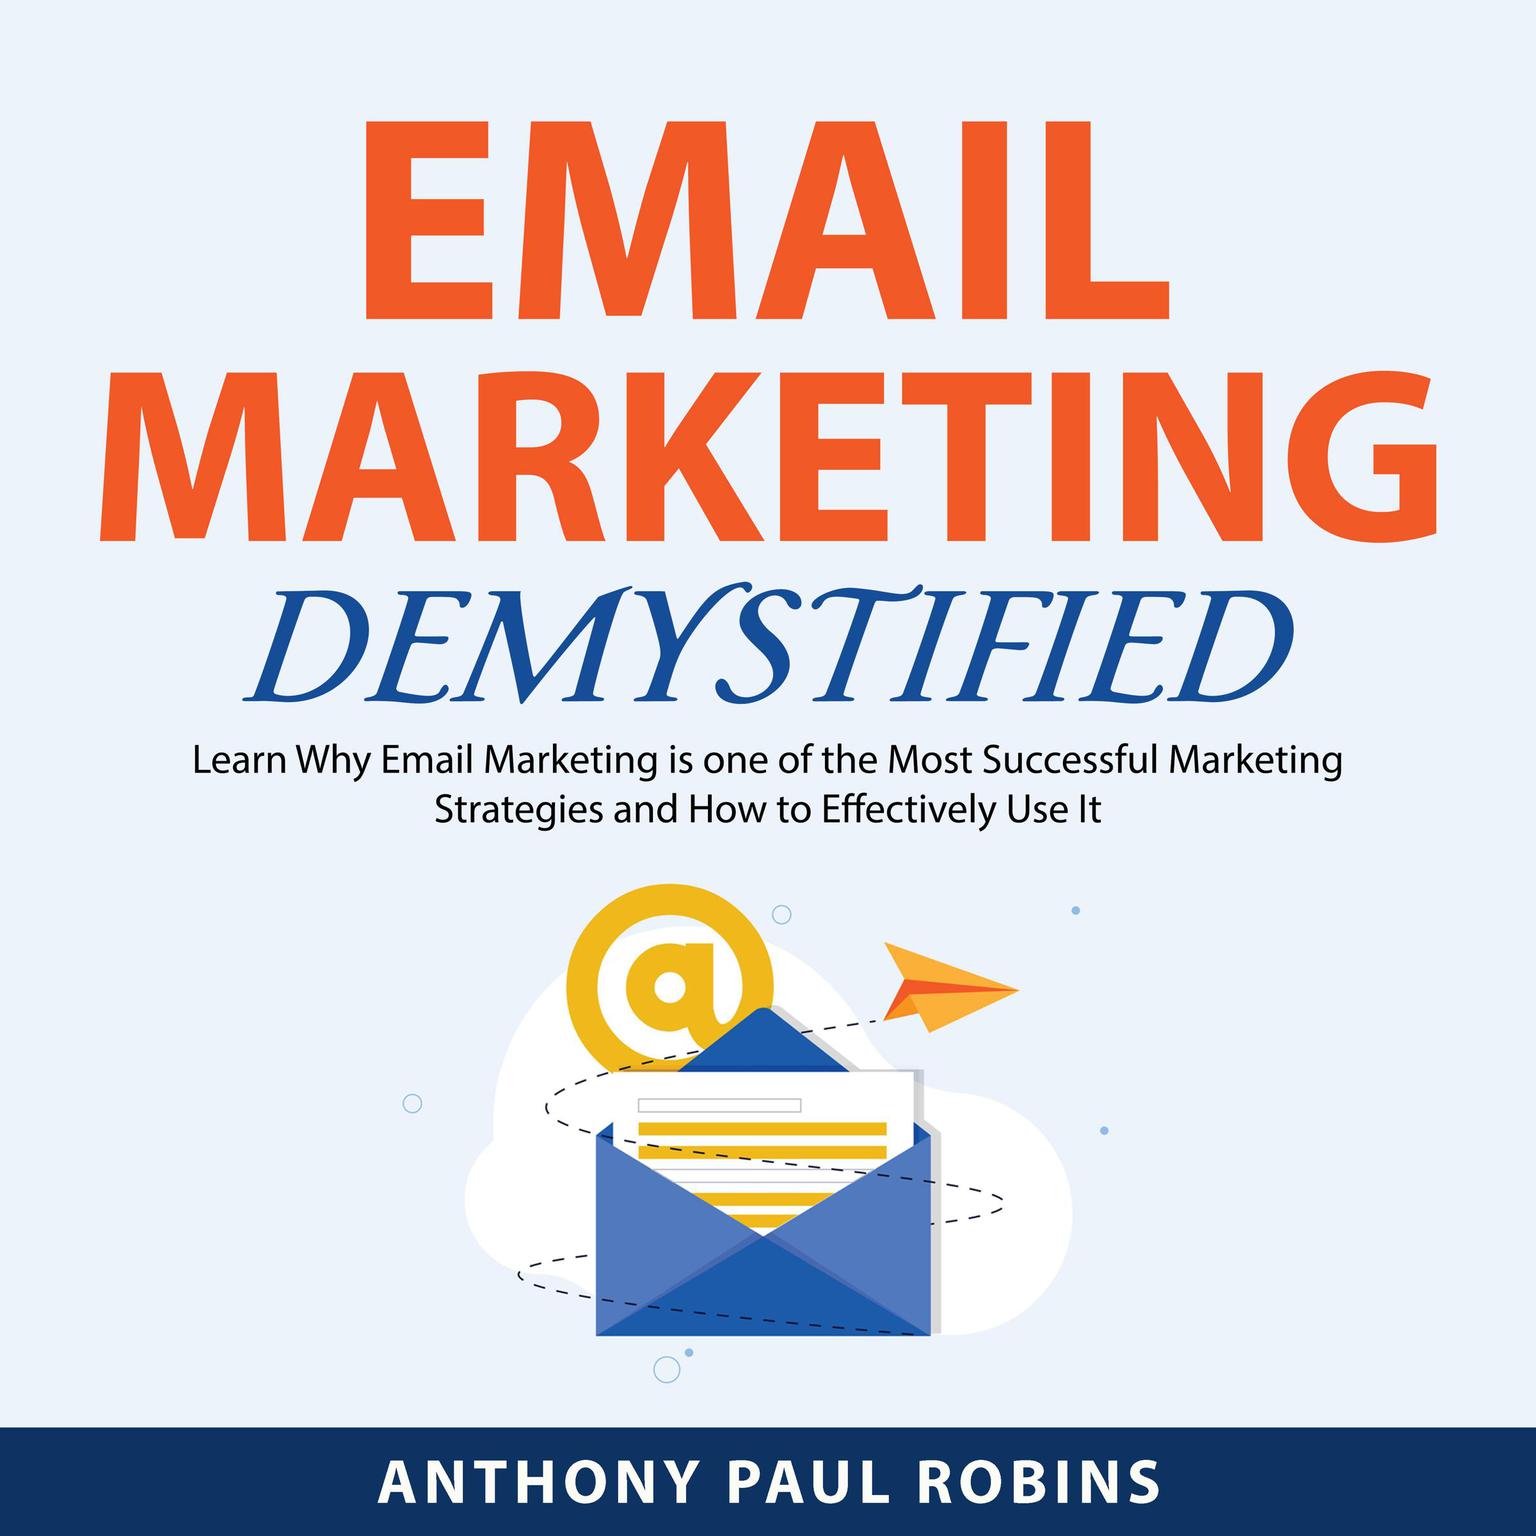 Email Marketing Demystified Audiobook, by Anthony Paul Robins